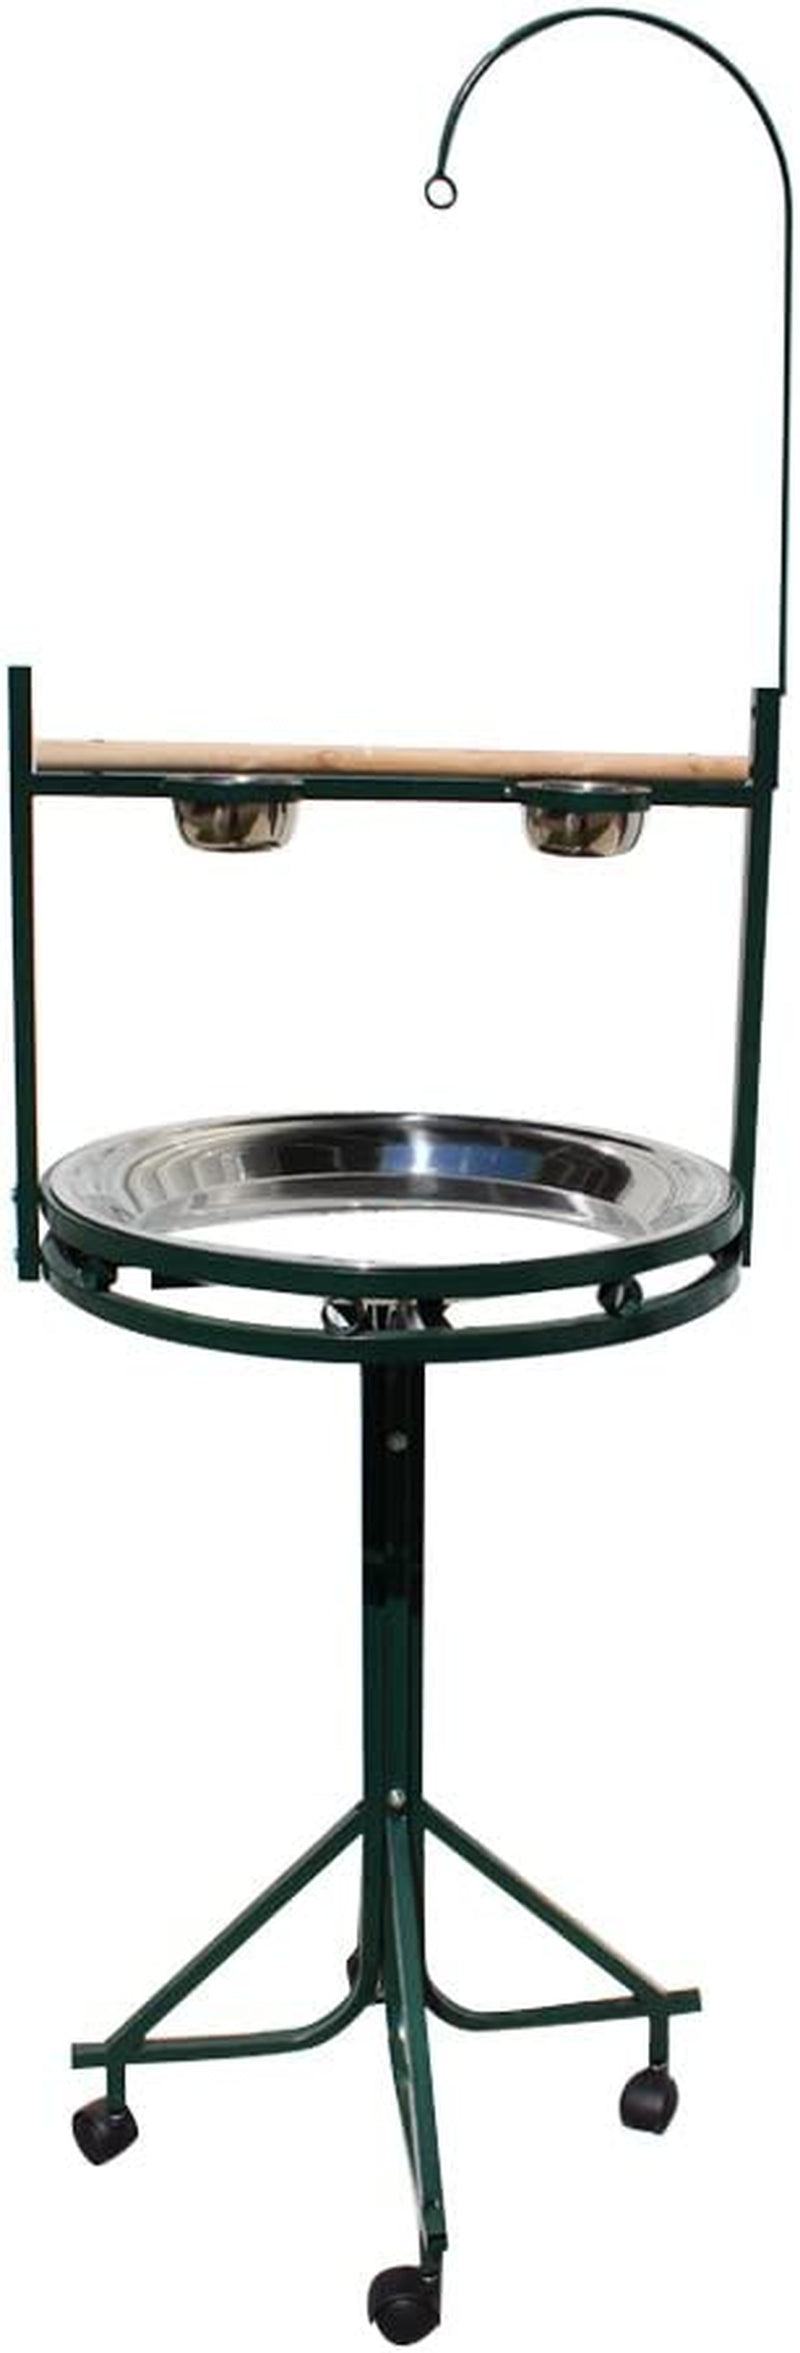 Birds LOVE Stainless Steel Tray, Non-Toxic, Powder Coated Parrot Playstand with Perch, Toy Hook and Stainless Steel Cups (Green) Animals & Pet Supplies > Pet Supplies > Bird Supplies Birds LOVE   